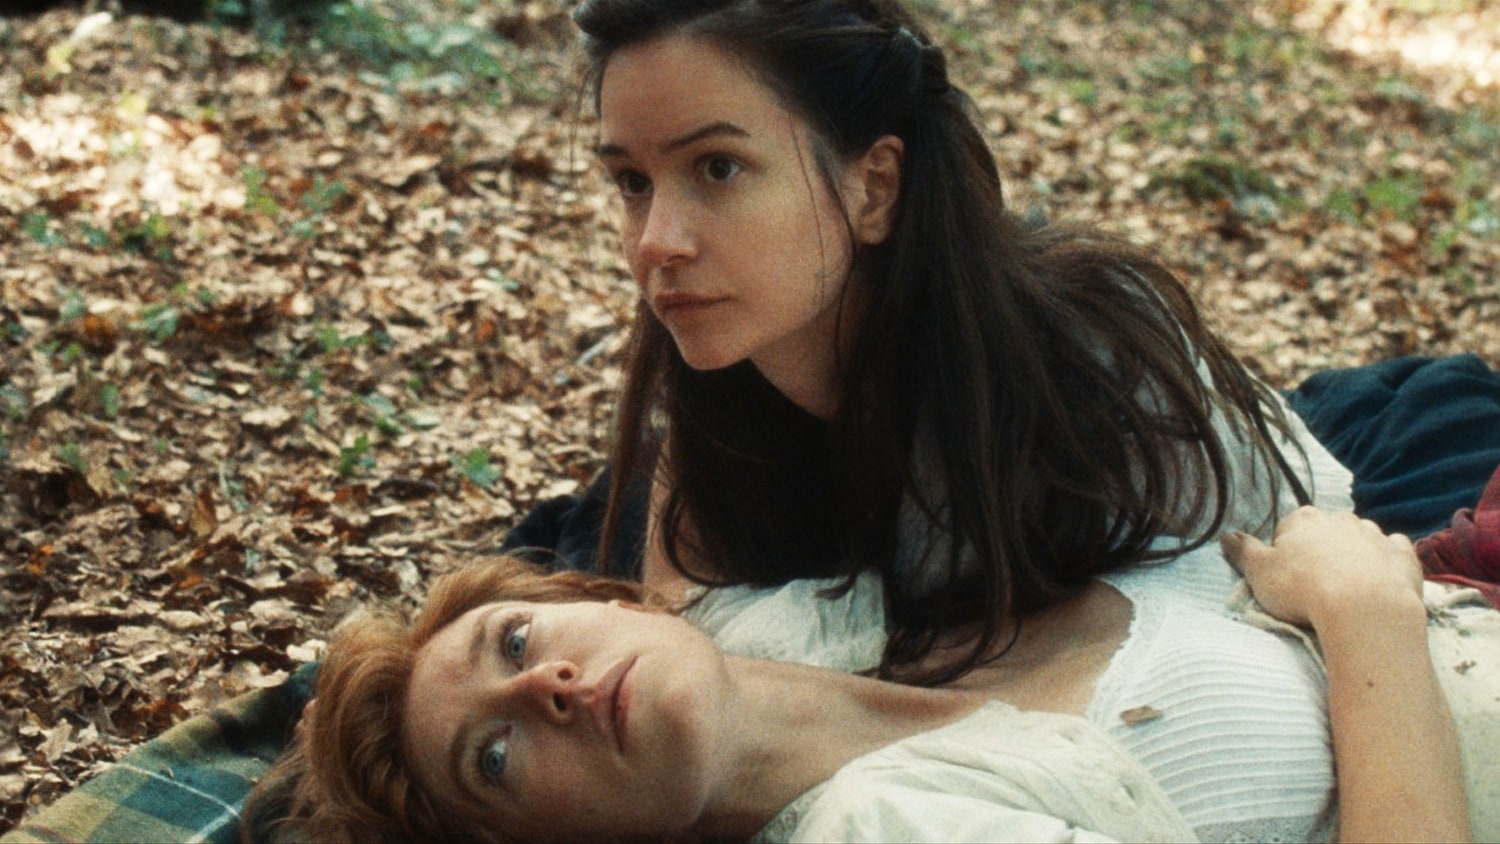 The World to Come star on complexity of portraying a 19th century lesbian romance picture